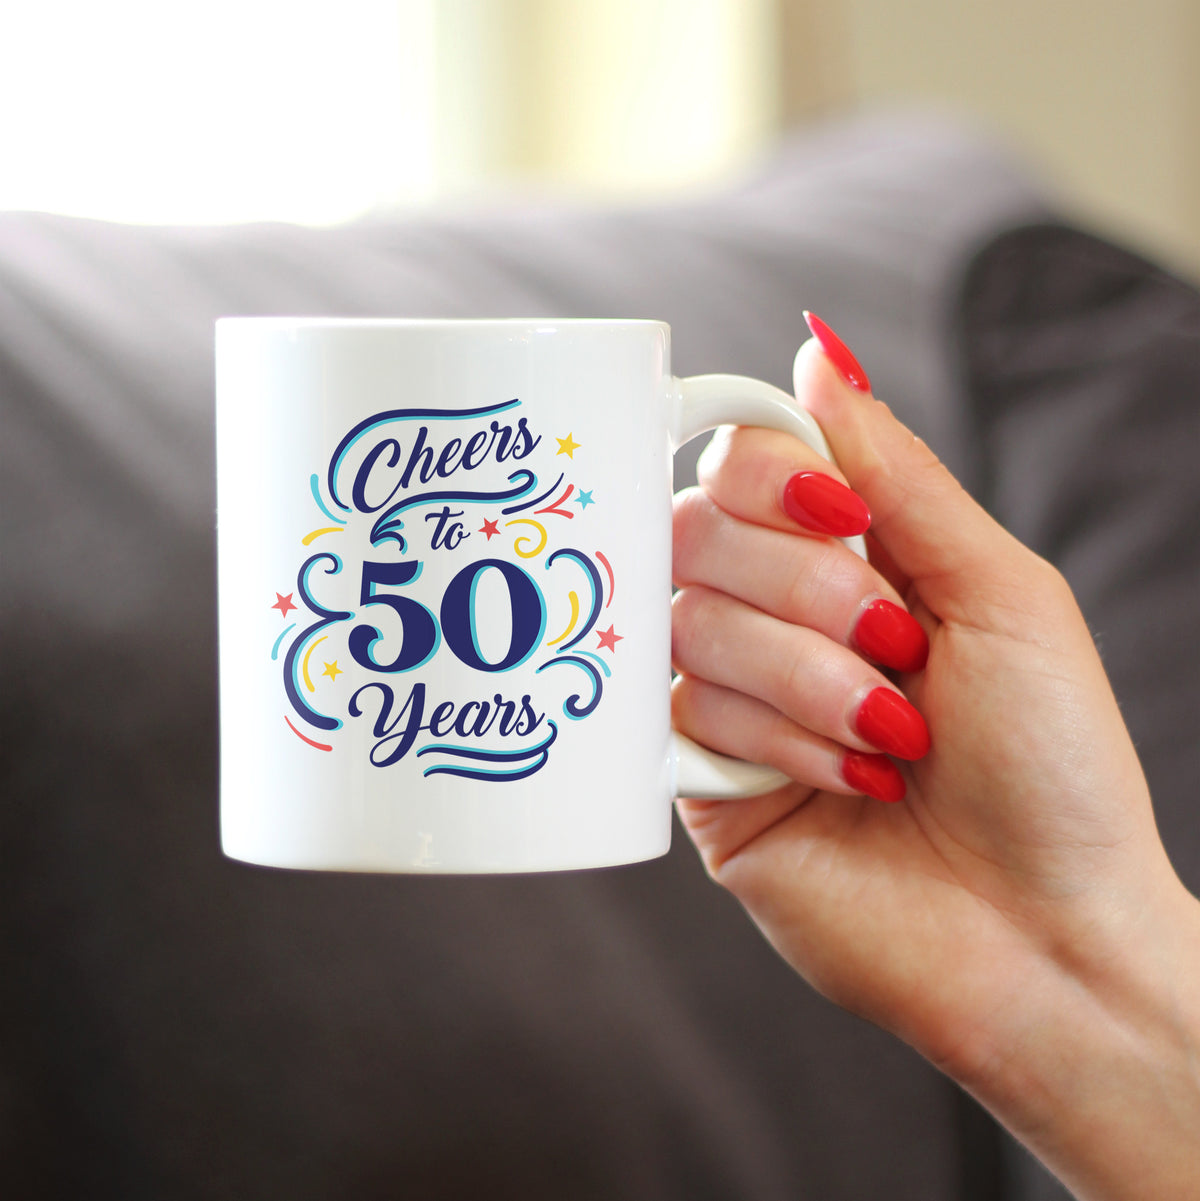 Cheers to 50 Years - Coffee Mug Gifts for Women &amp; Men - 50th Anniversary Party Decor